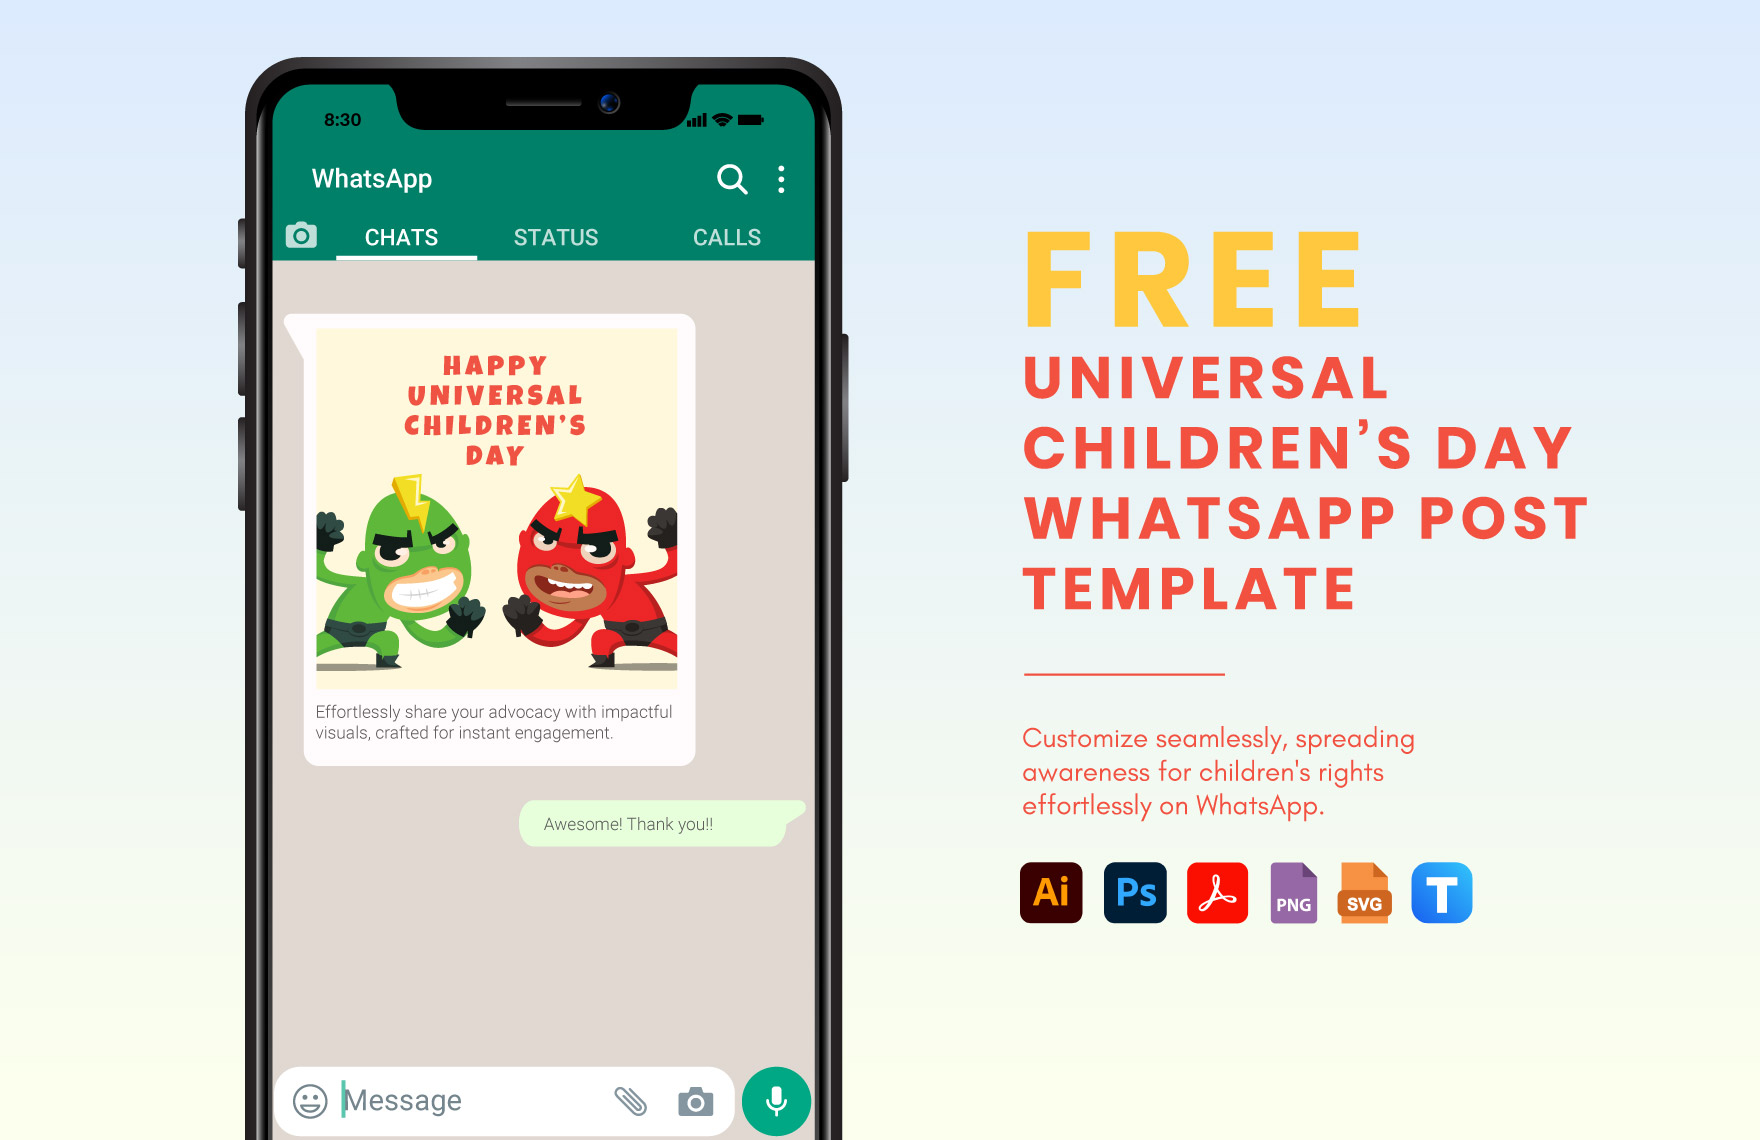 Free Universal Children’s Day WhatsApp Post Template in PDF, Illustrator, PSD, SVG, PNG